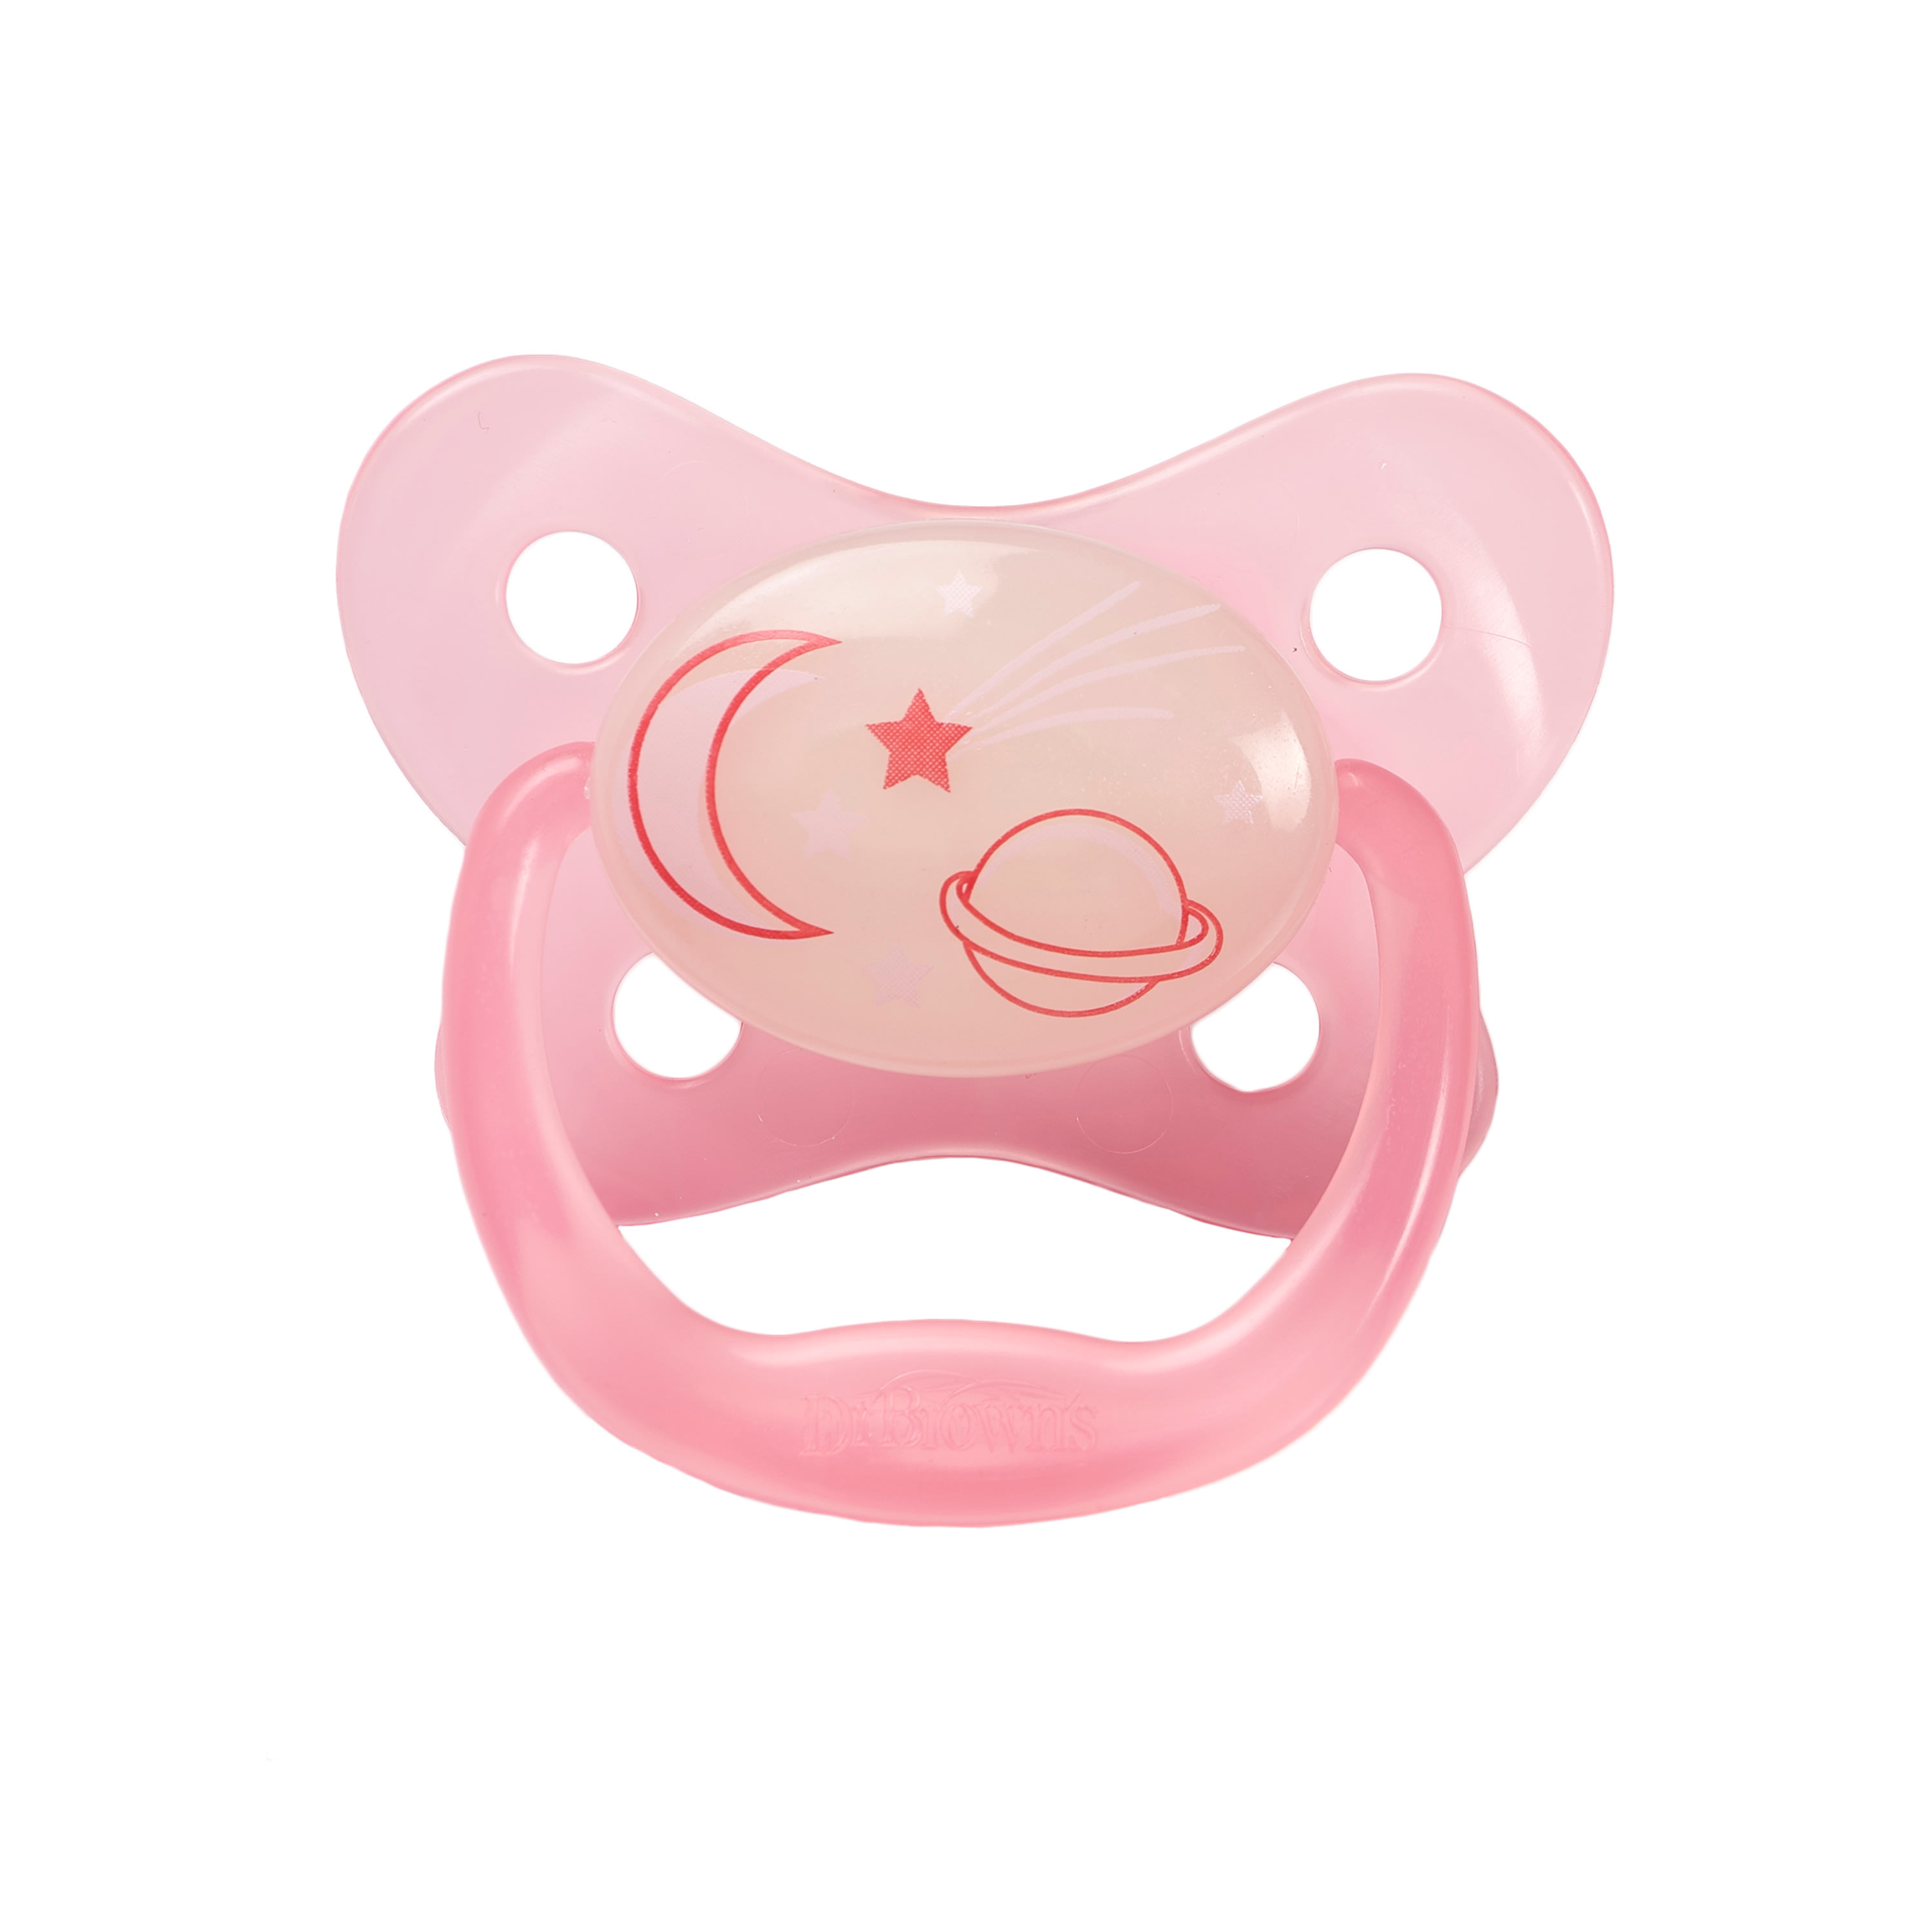 Dr. Brown's PreVent Glow in the Dark BUTTERFLY SHIELD Pacifier_1